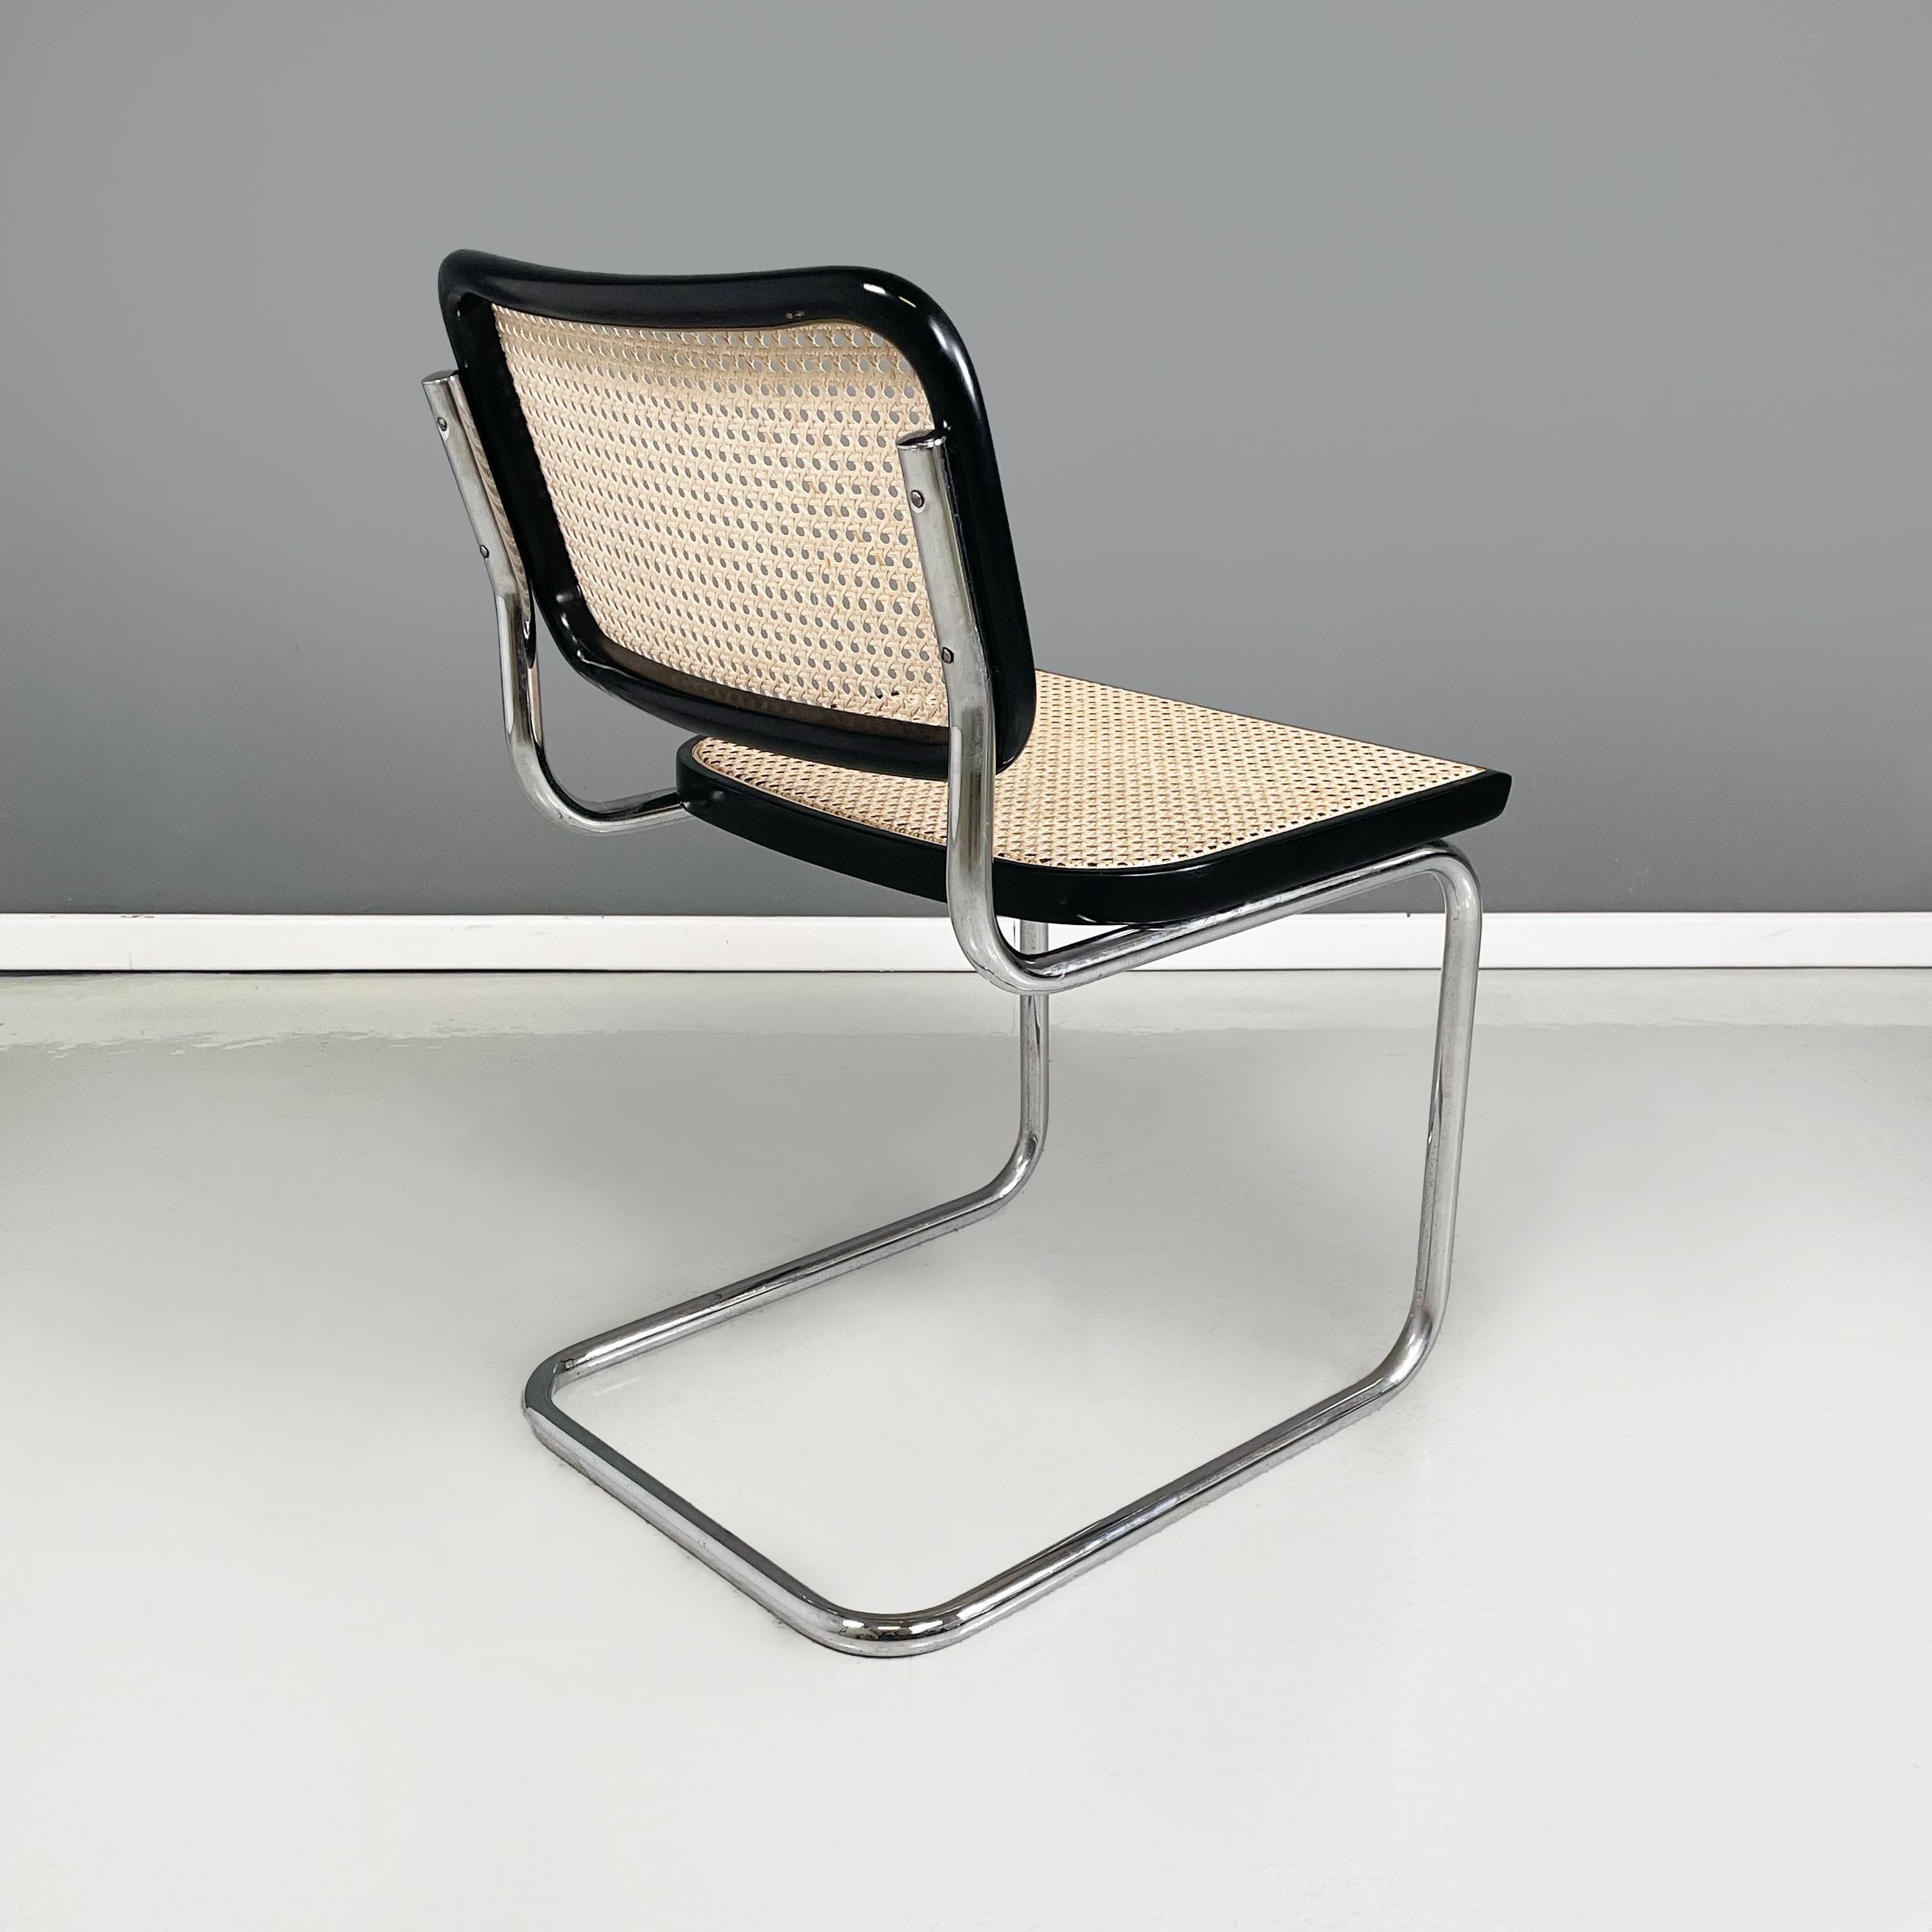 Italian mid-century modern Chair in straw, black wood and curved steel, 1960s In Good Condition For Sale In MIlano, IT